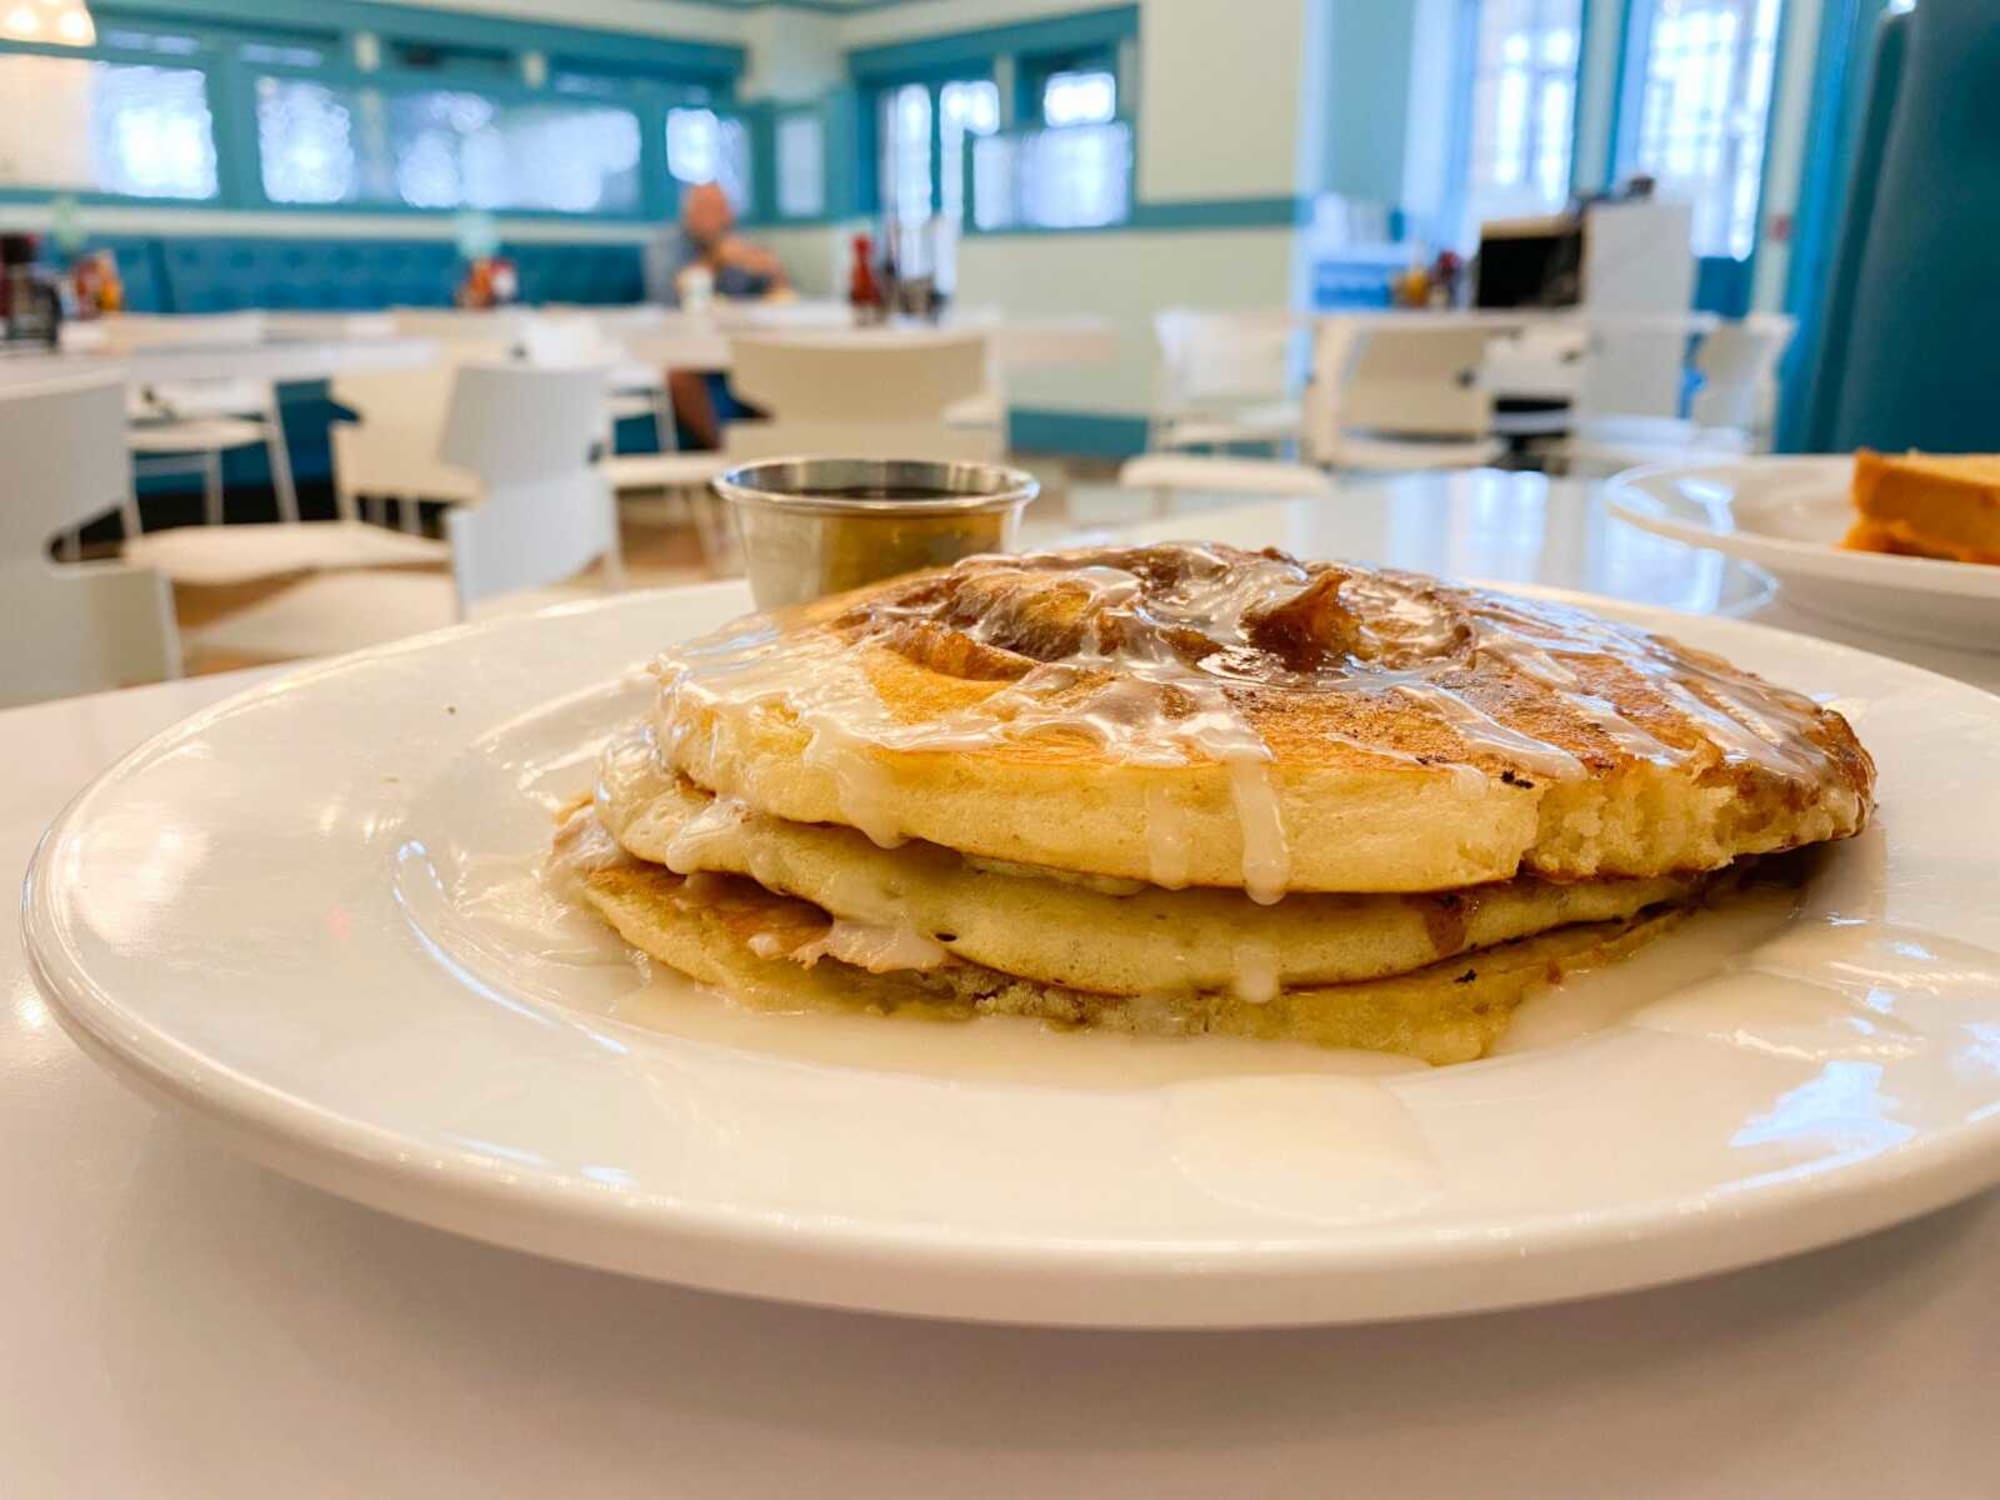 Most popular restaurants to enjoy a stack on National Pancake Day